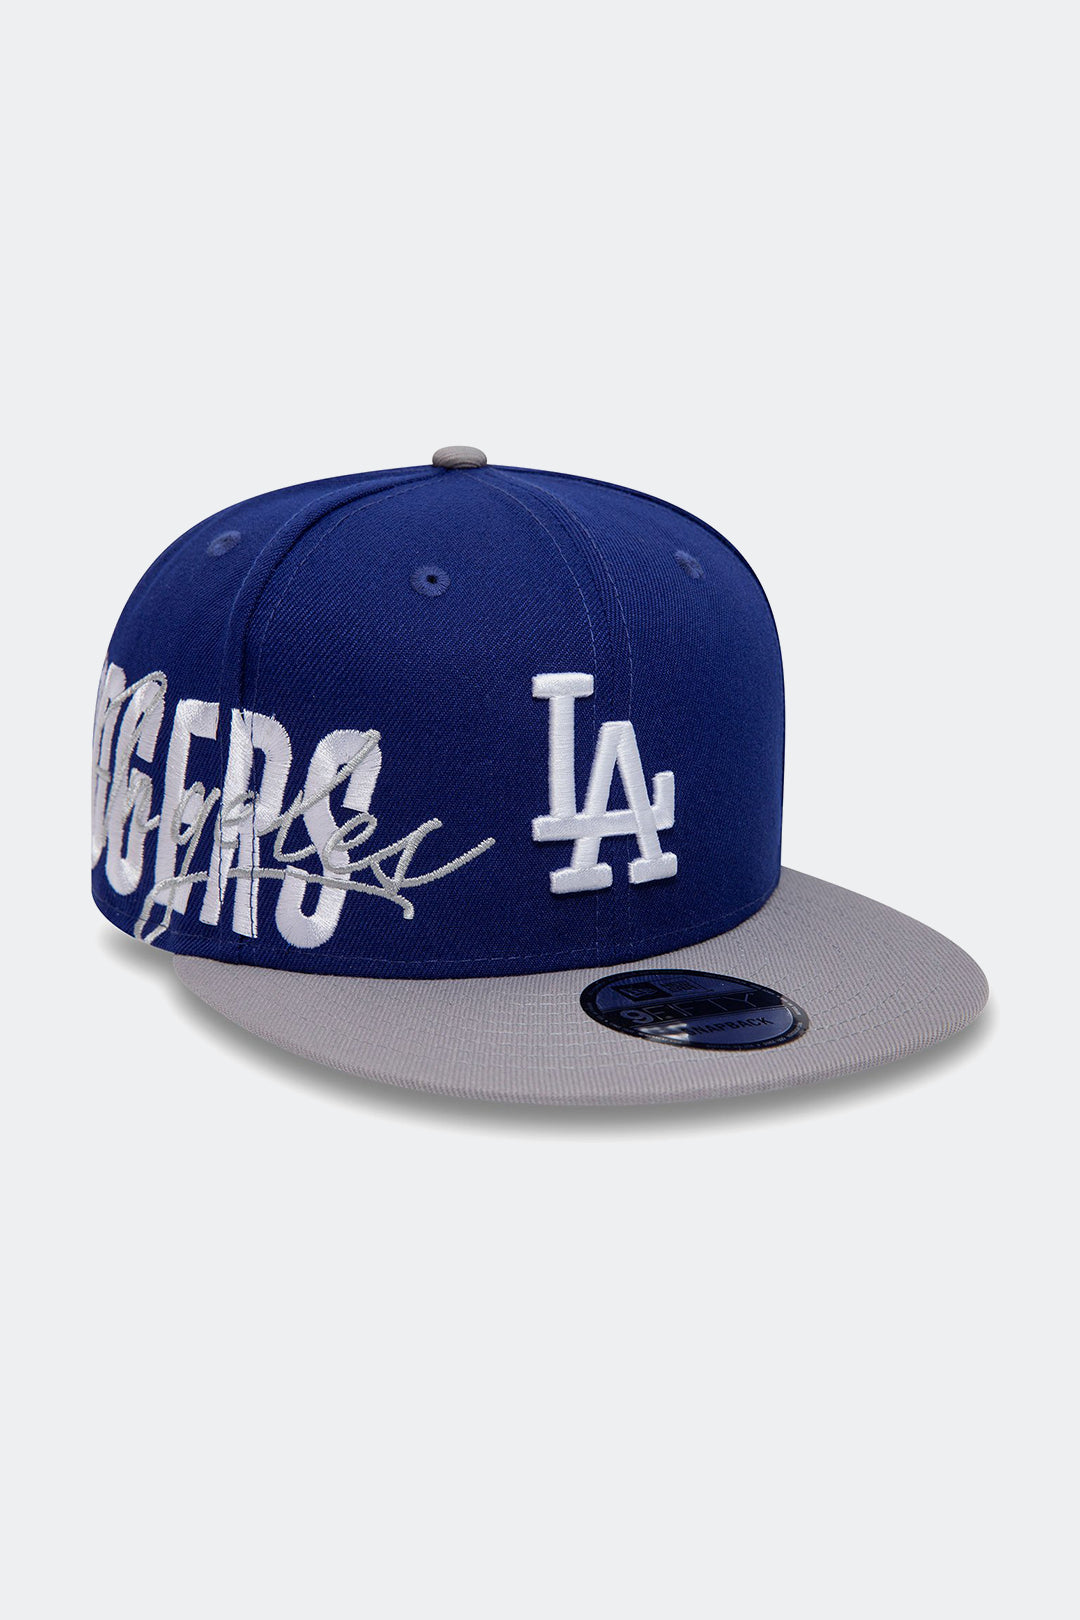 NEW ERA 9FIFTY LOS ANGELES DODGERS "SIDE FONT" - HYPE